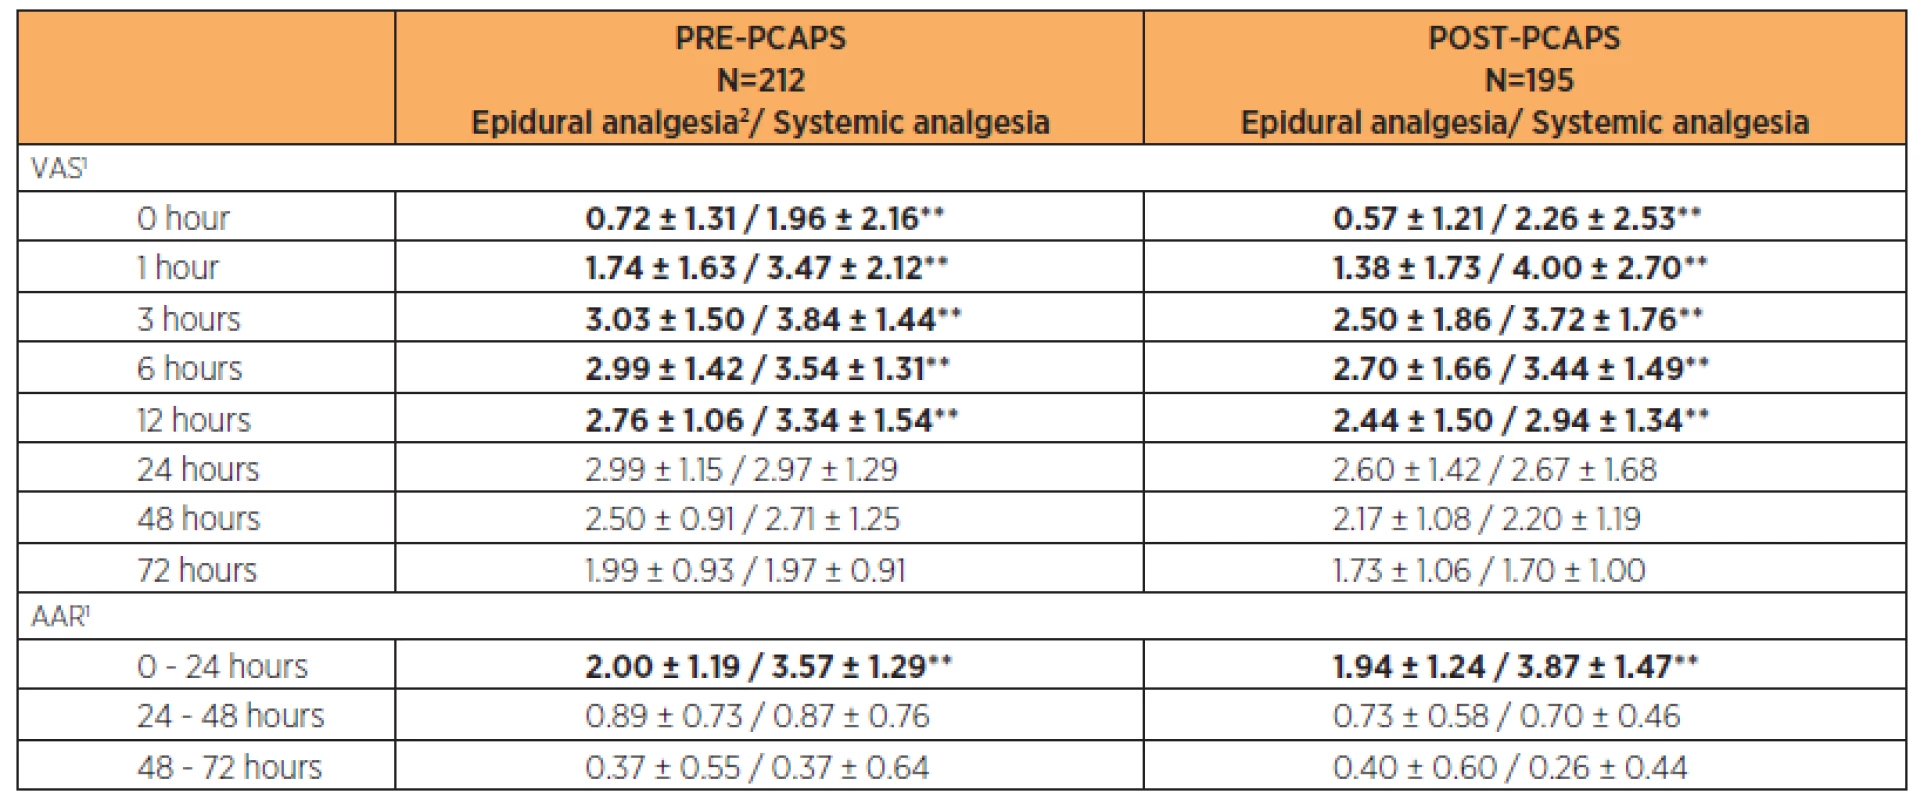 Comparison of VAS and ARR in PRE-PCAPS and POST-PCAPS groups according to the method of postoperative analgesia